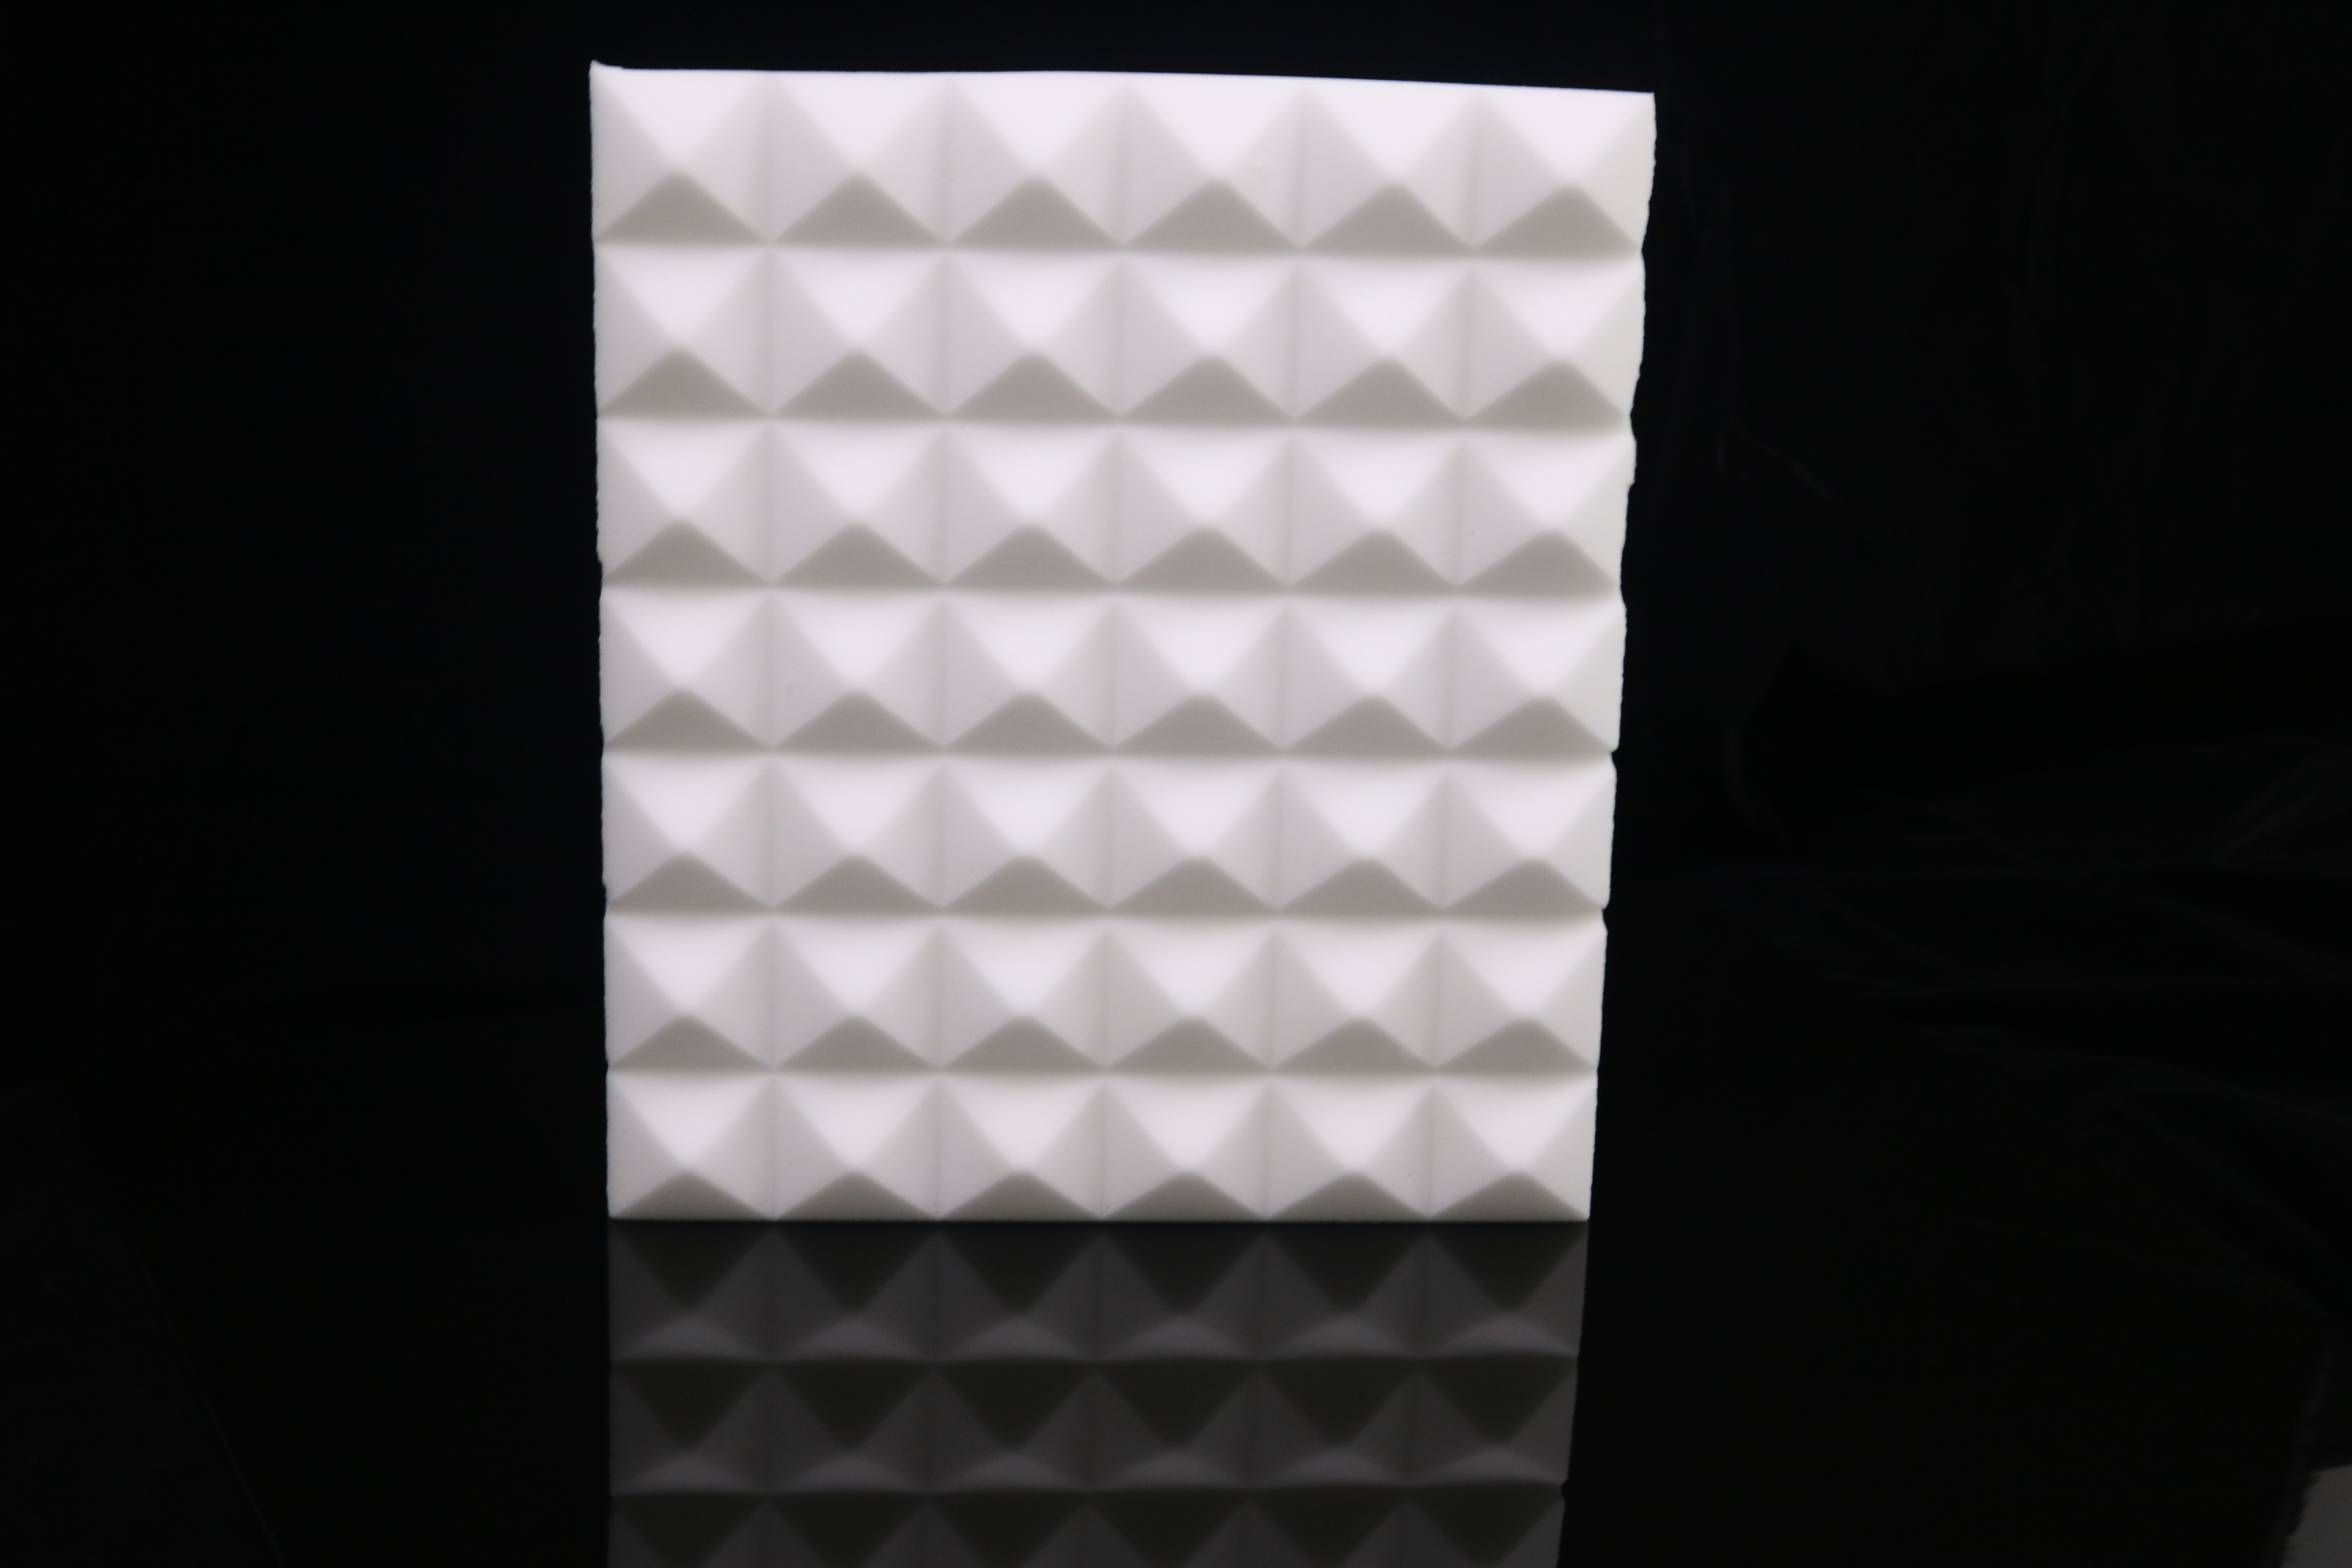 What sound-absorbing material is better?